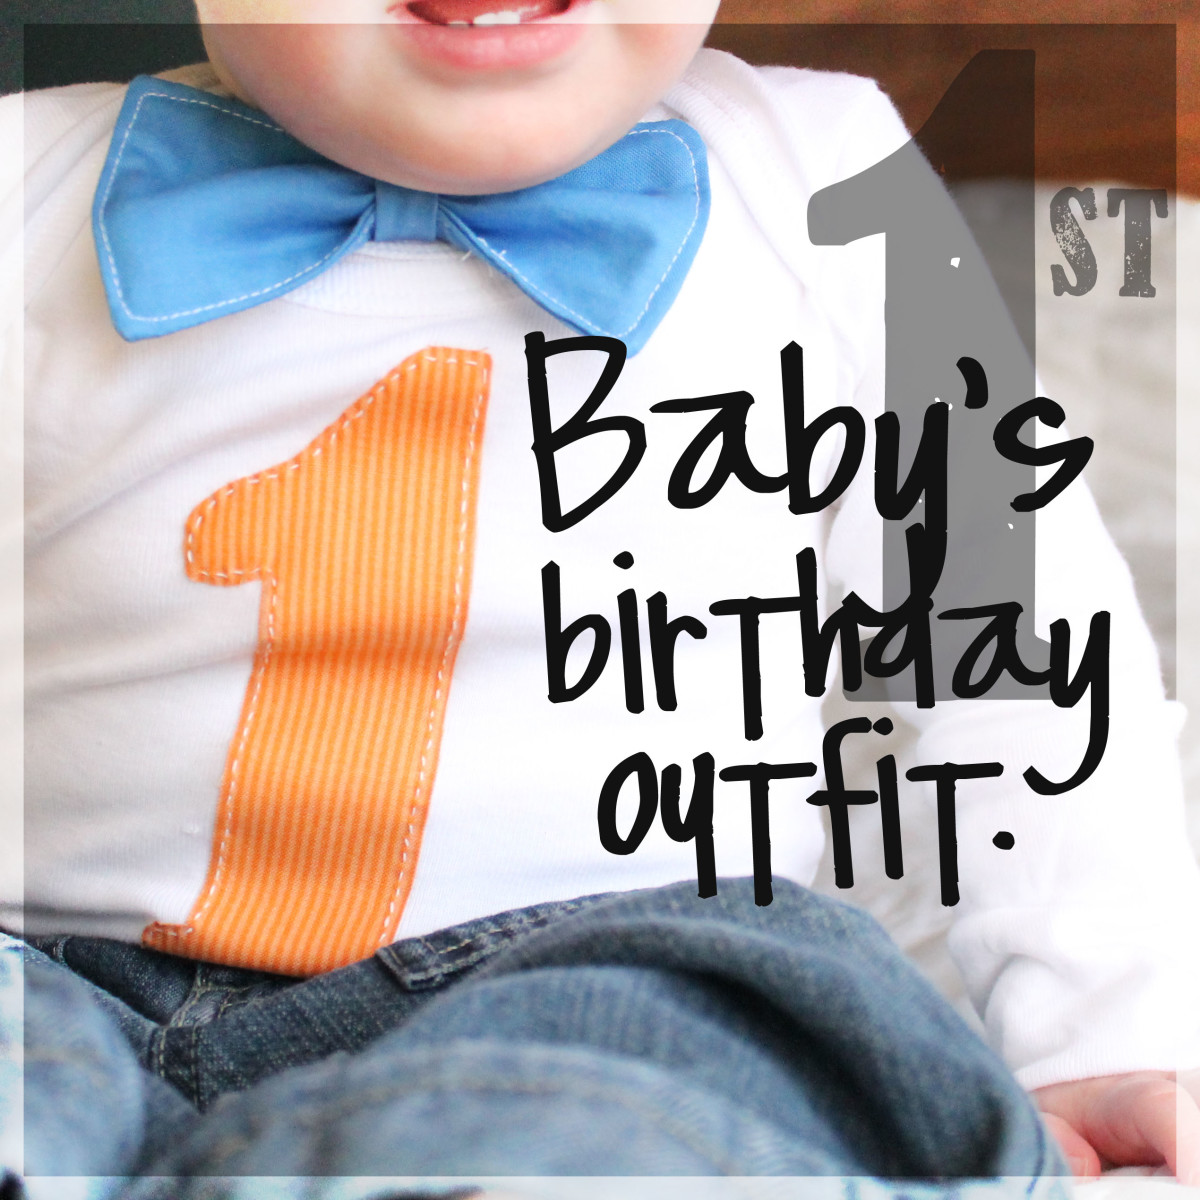 A Handmade Project: An Outfit for a Baby Boy's First Birthday